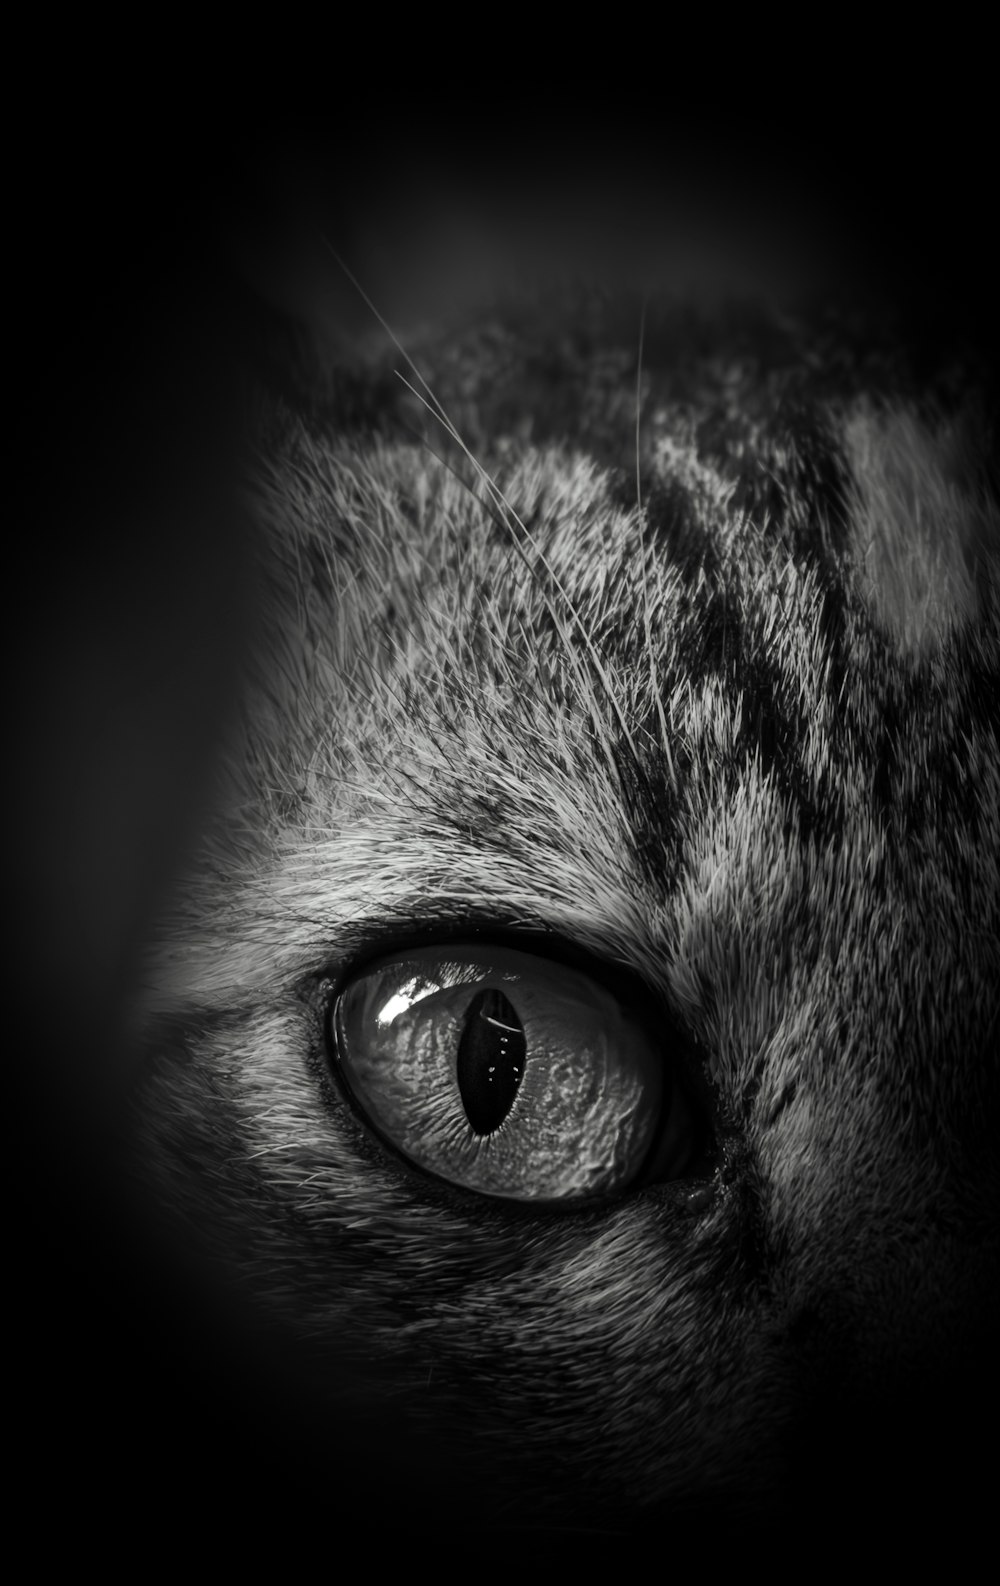 a black and white photo of a cat's eye